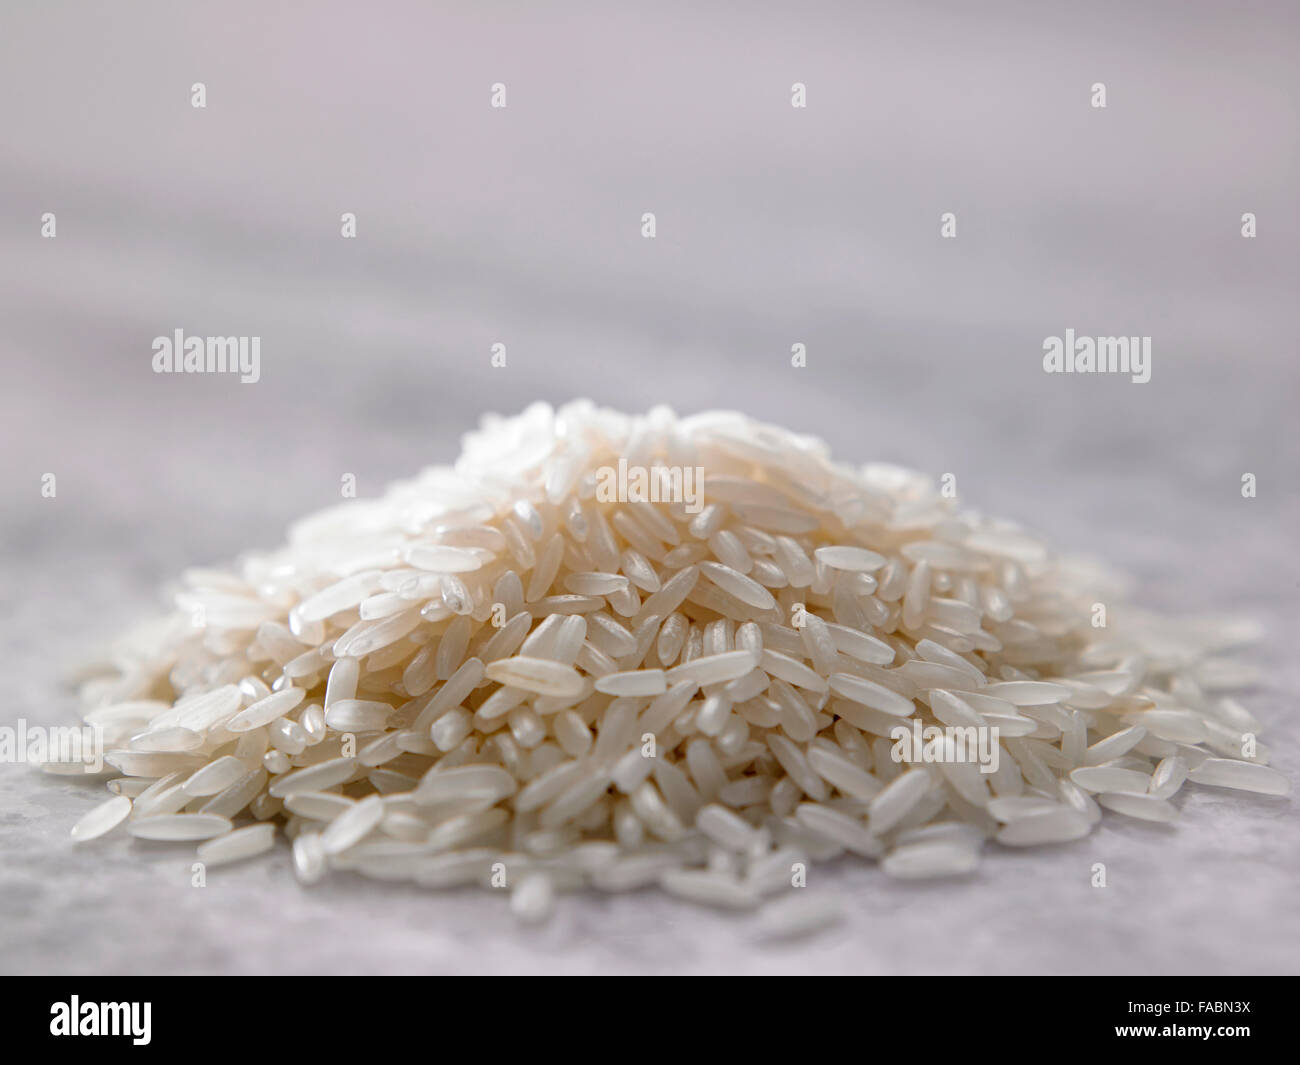 A box of Zatarains Red Beans and Rice on white background Stock Photo -  Alamy